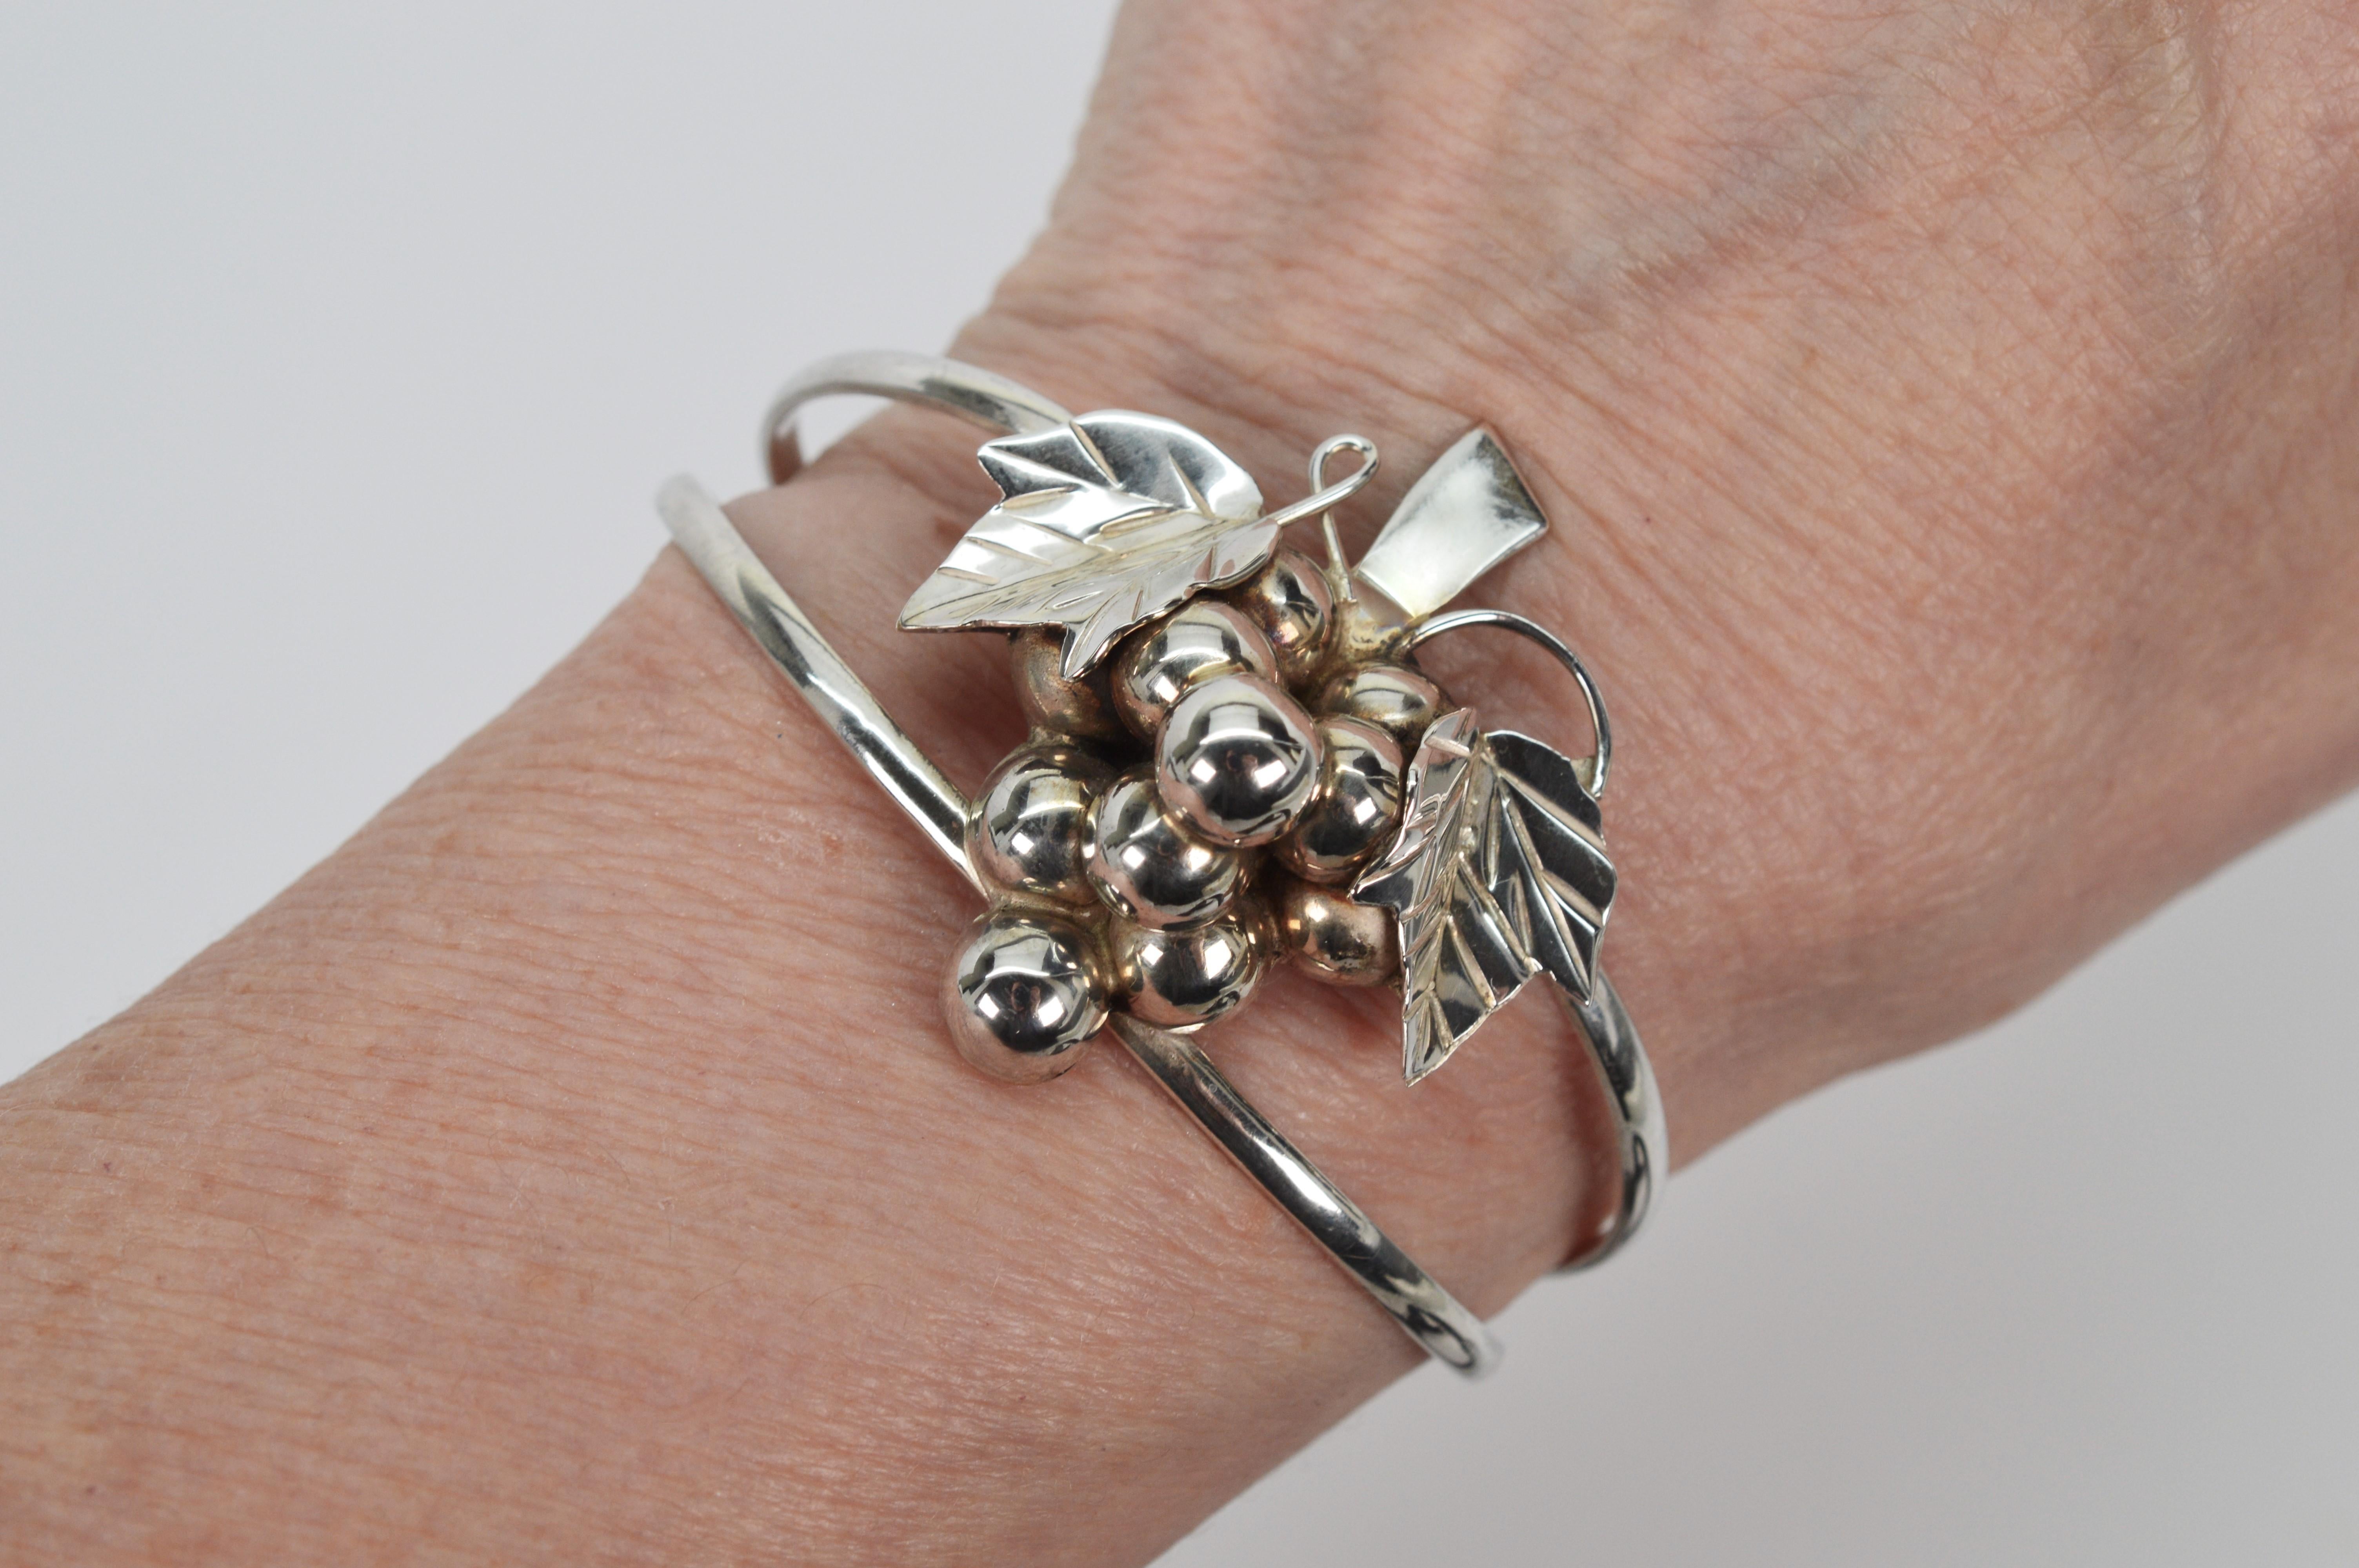 Sculptured sterling silver depicts a natural grapevine cluster as the focal point of this artisan .925 sterling silver cuff bracelet. Traditionally a symbol of abundance the hand crafted grapevine cluster applique measures approximately 1-1/2 x